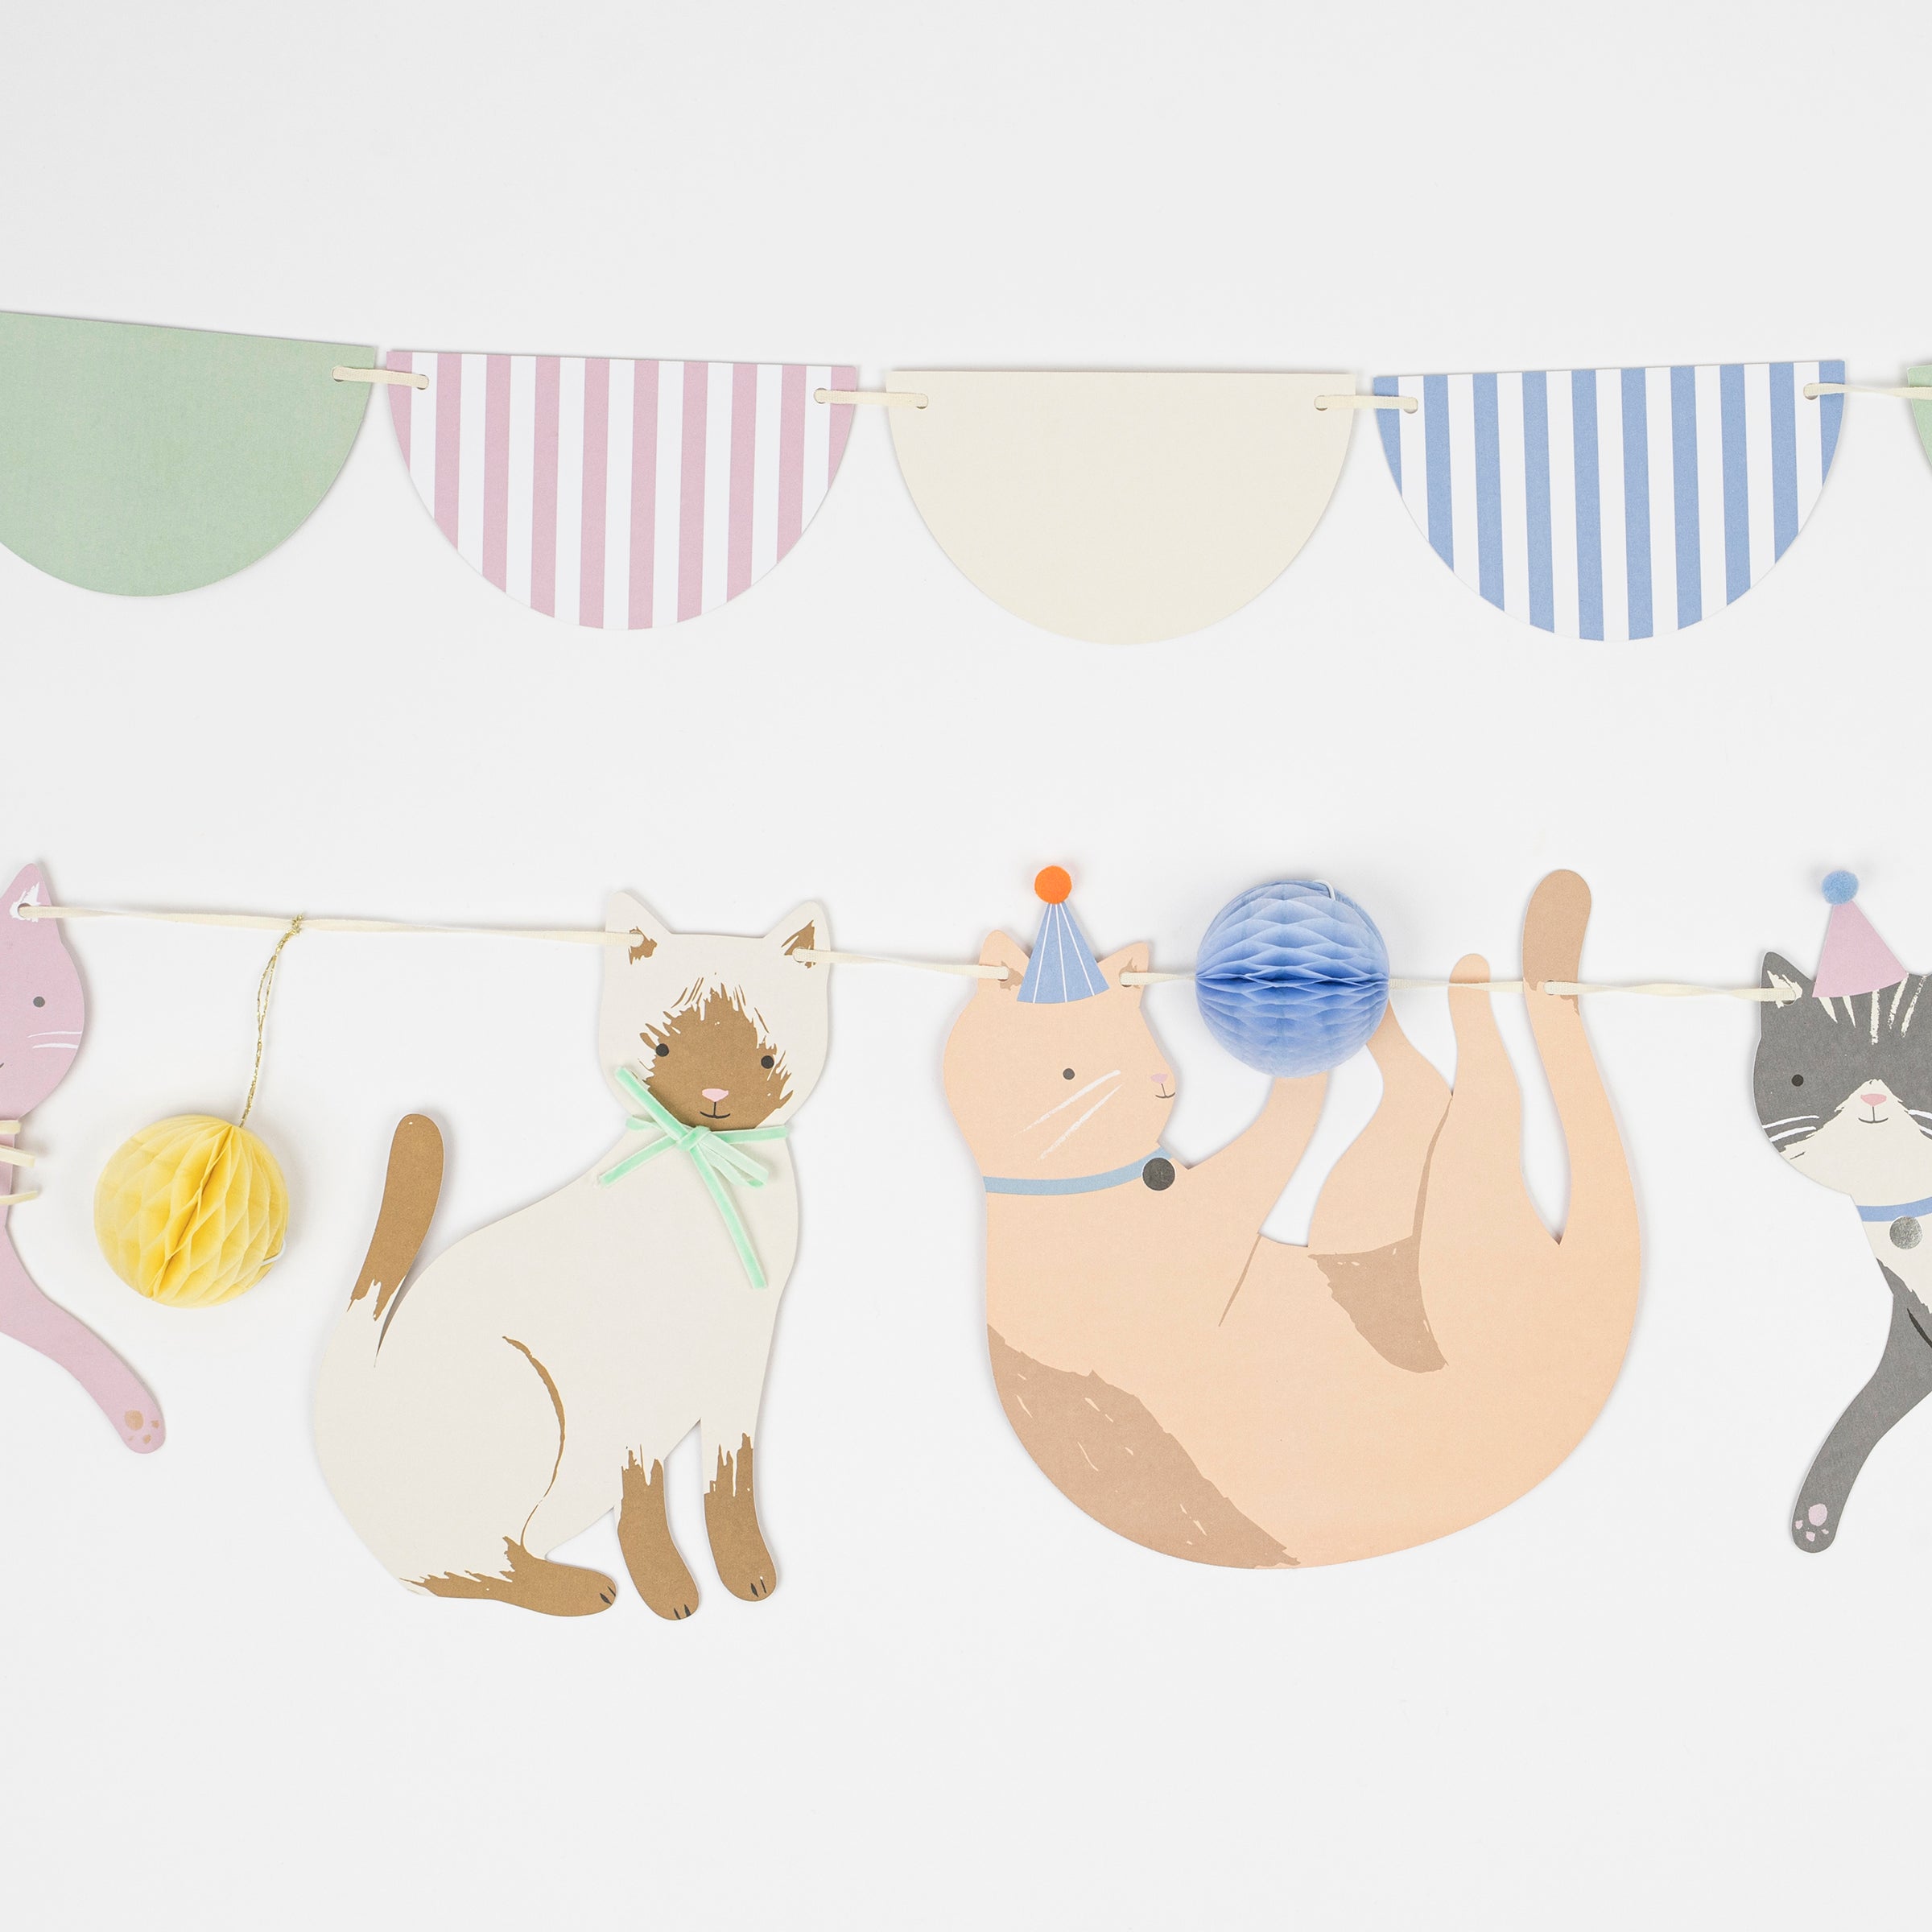 A cat themed birthday party will look amazing with our paper garland featuring cute cat decorations.